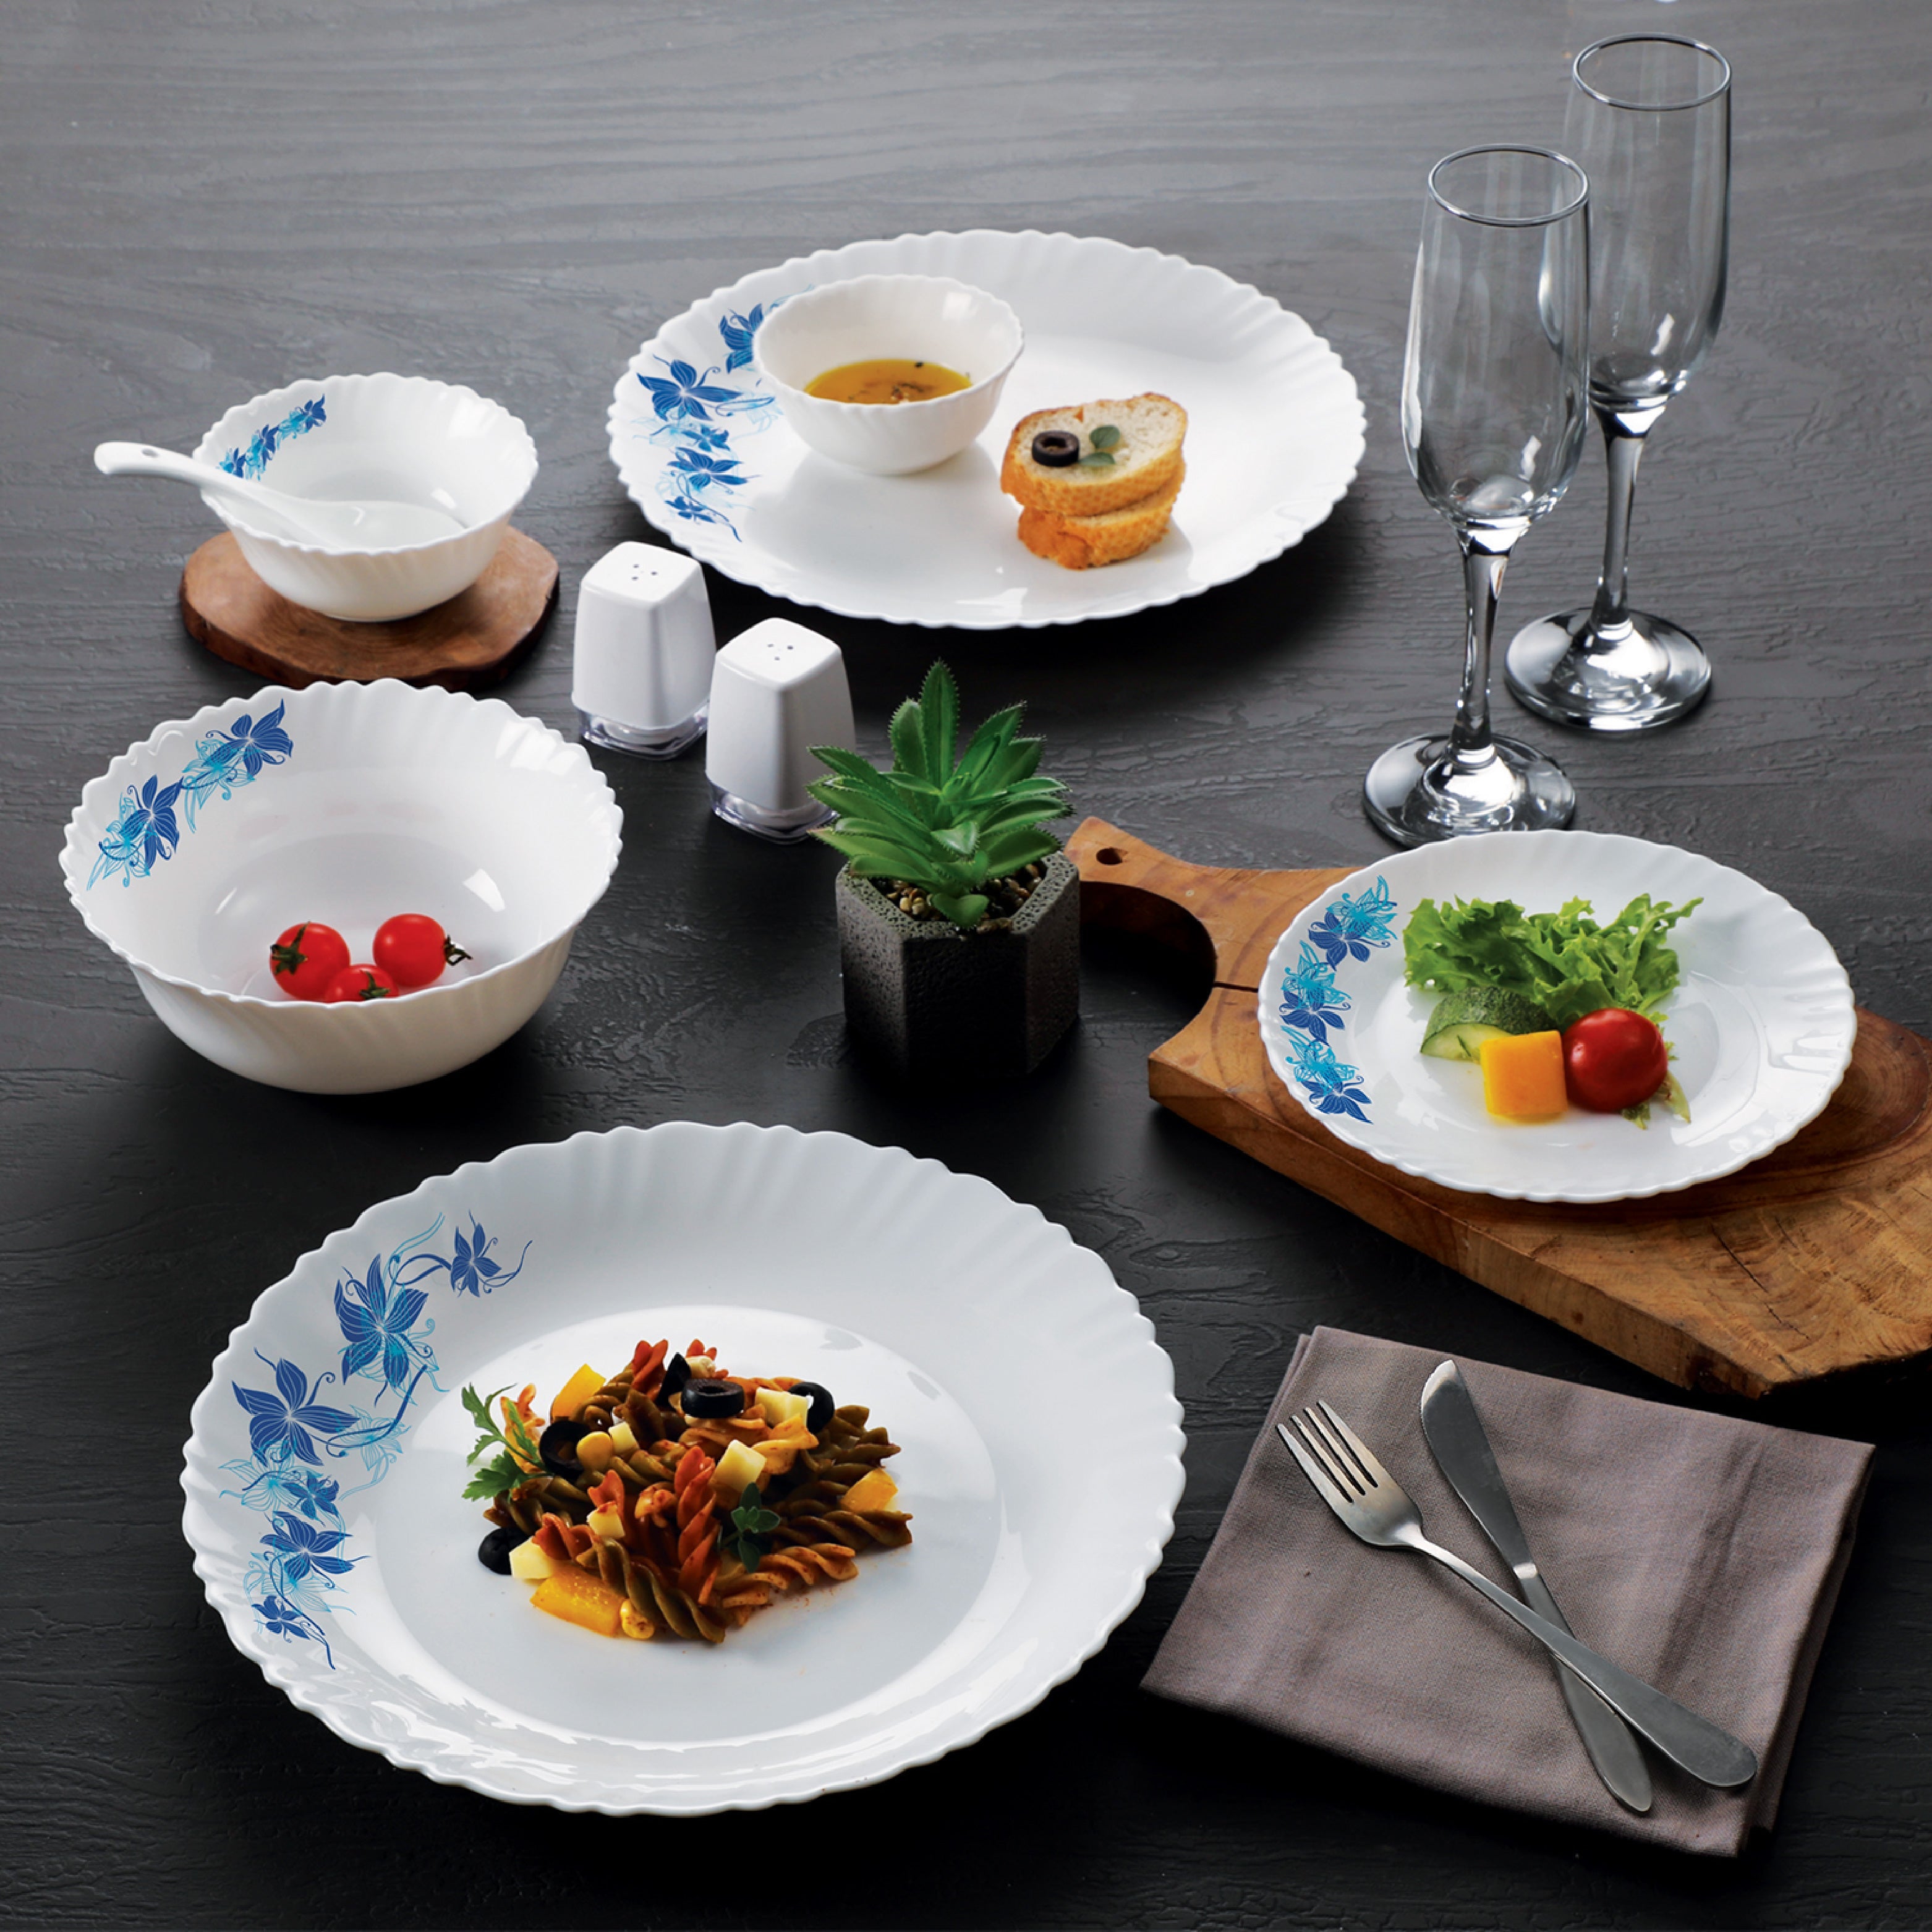 Vibrant 49-piece opalware dinner set, adorned with floral motifs. Includes plates, bowls, and serveware for elegant dining